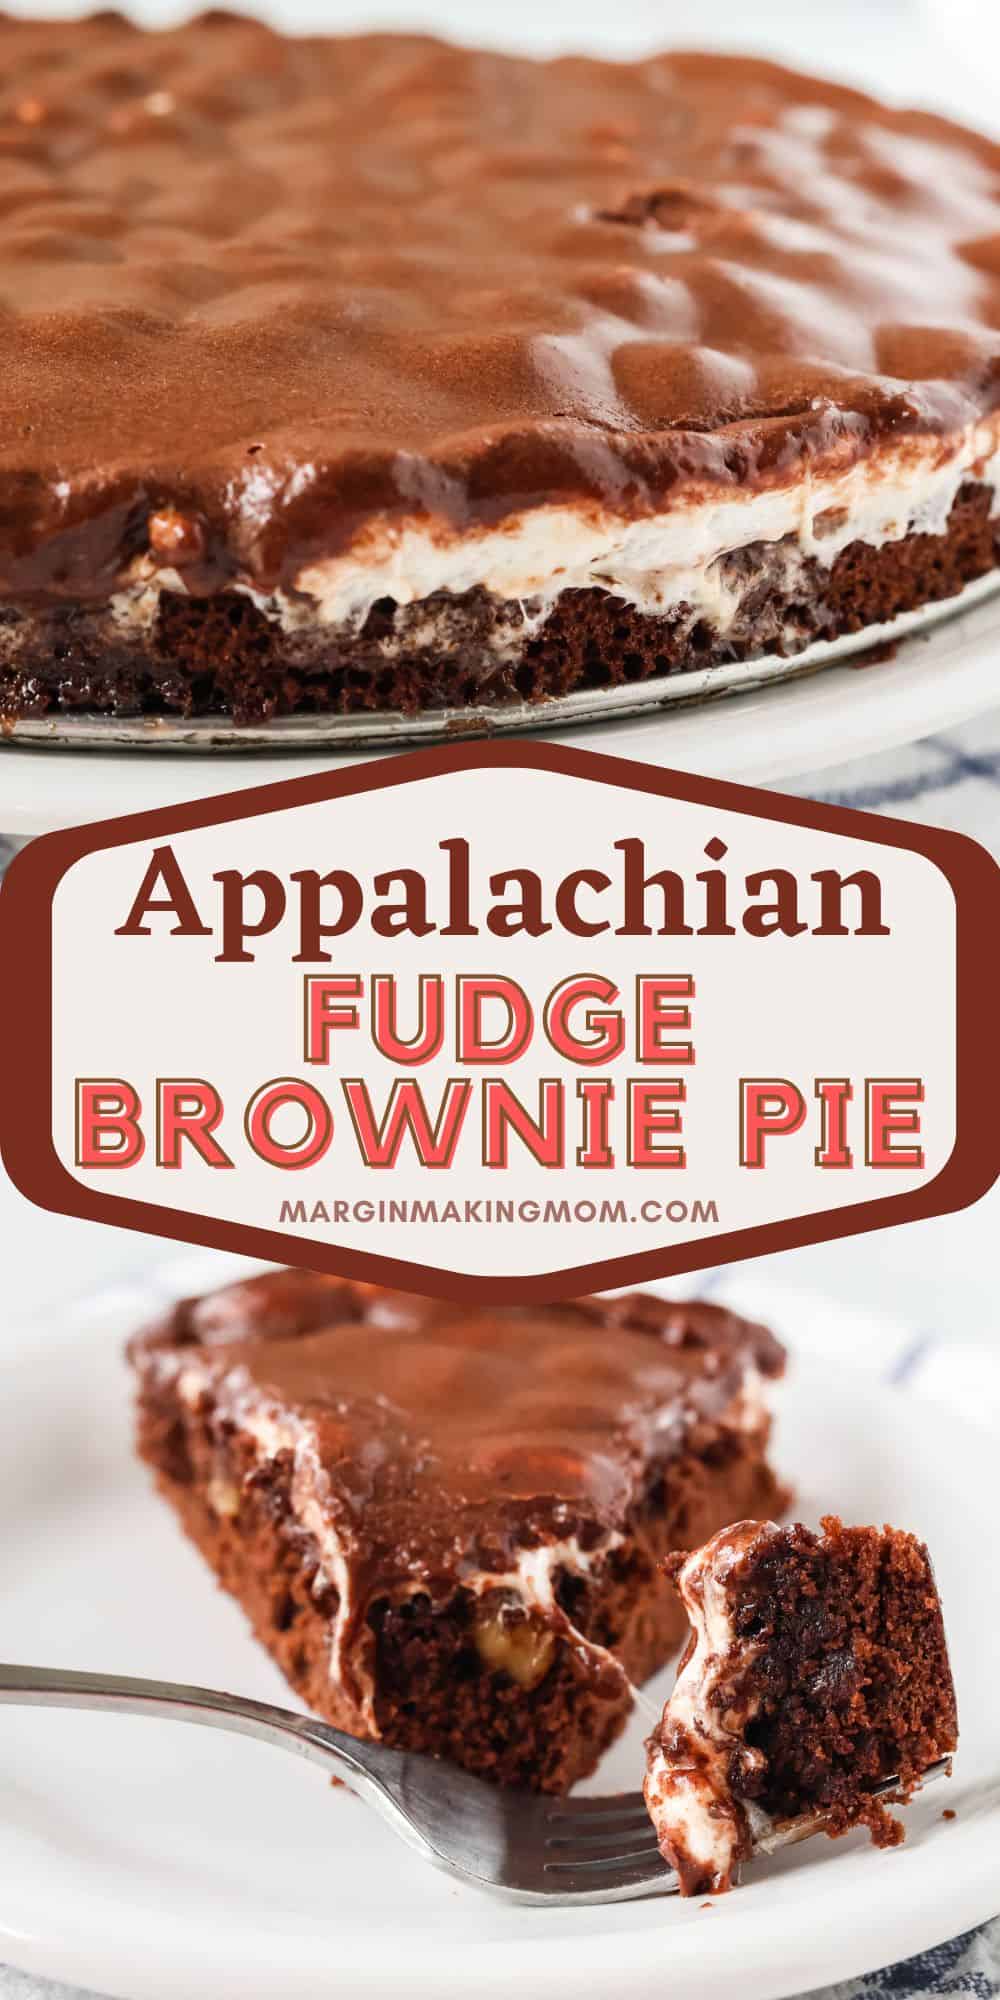 two photos showing different views of Appalachian fudge brownie pie.